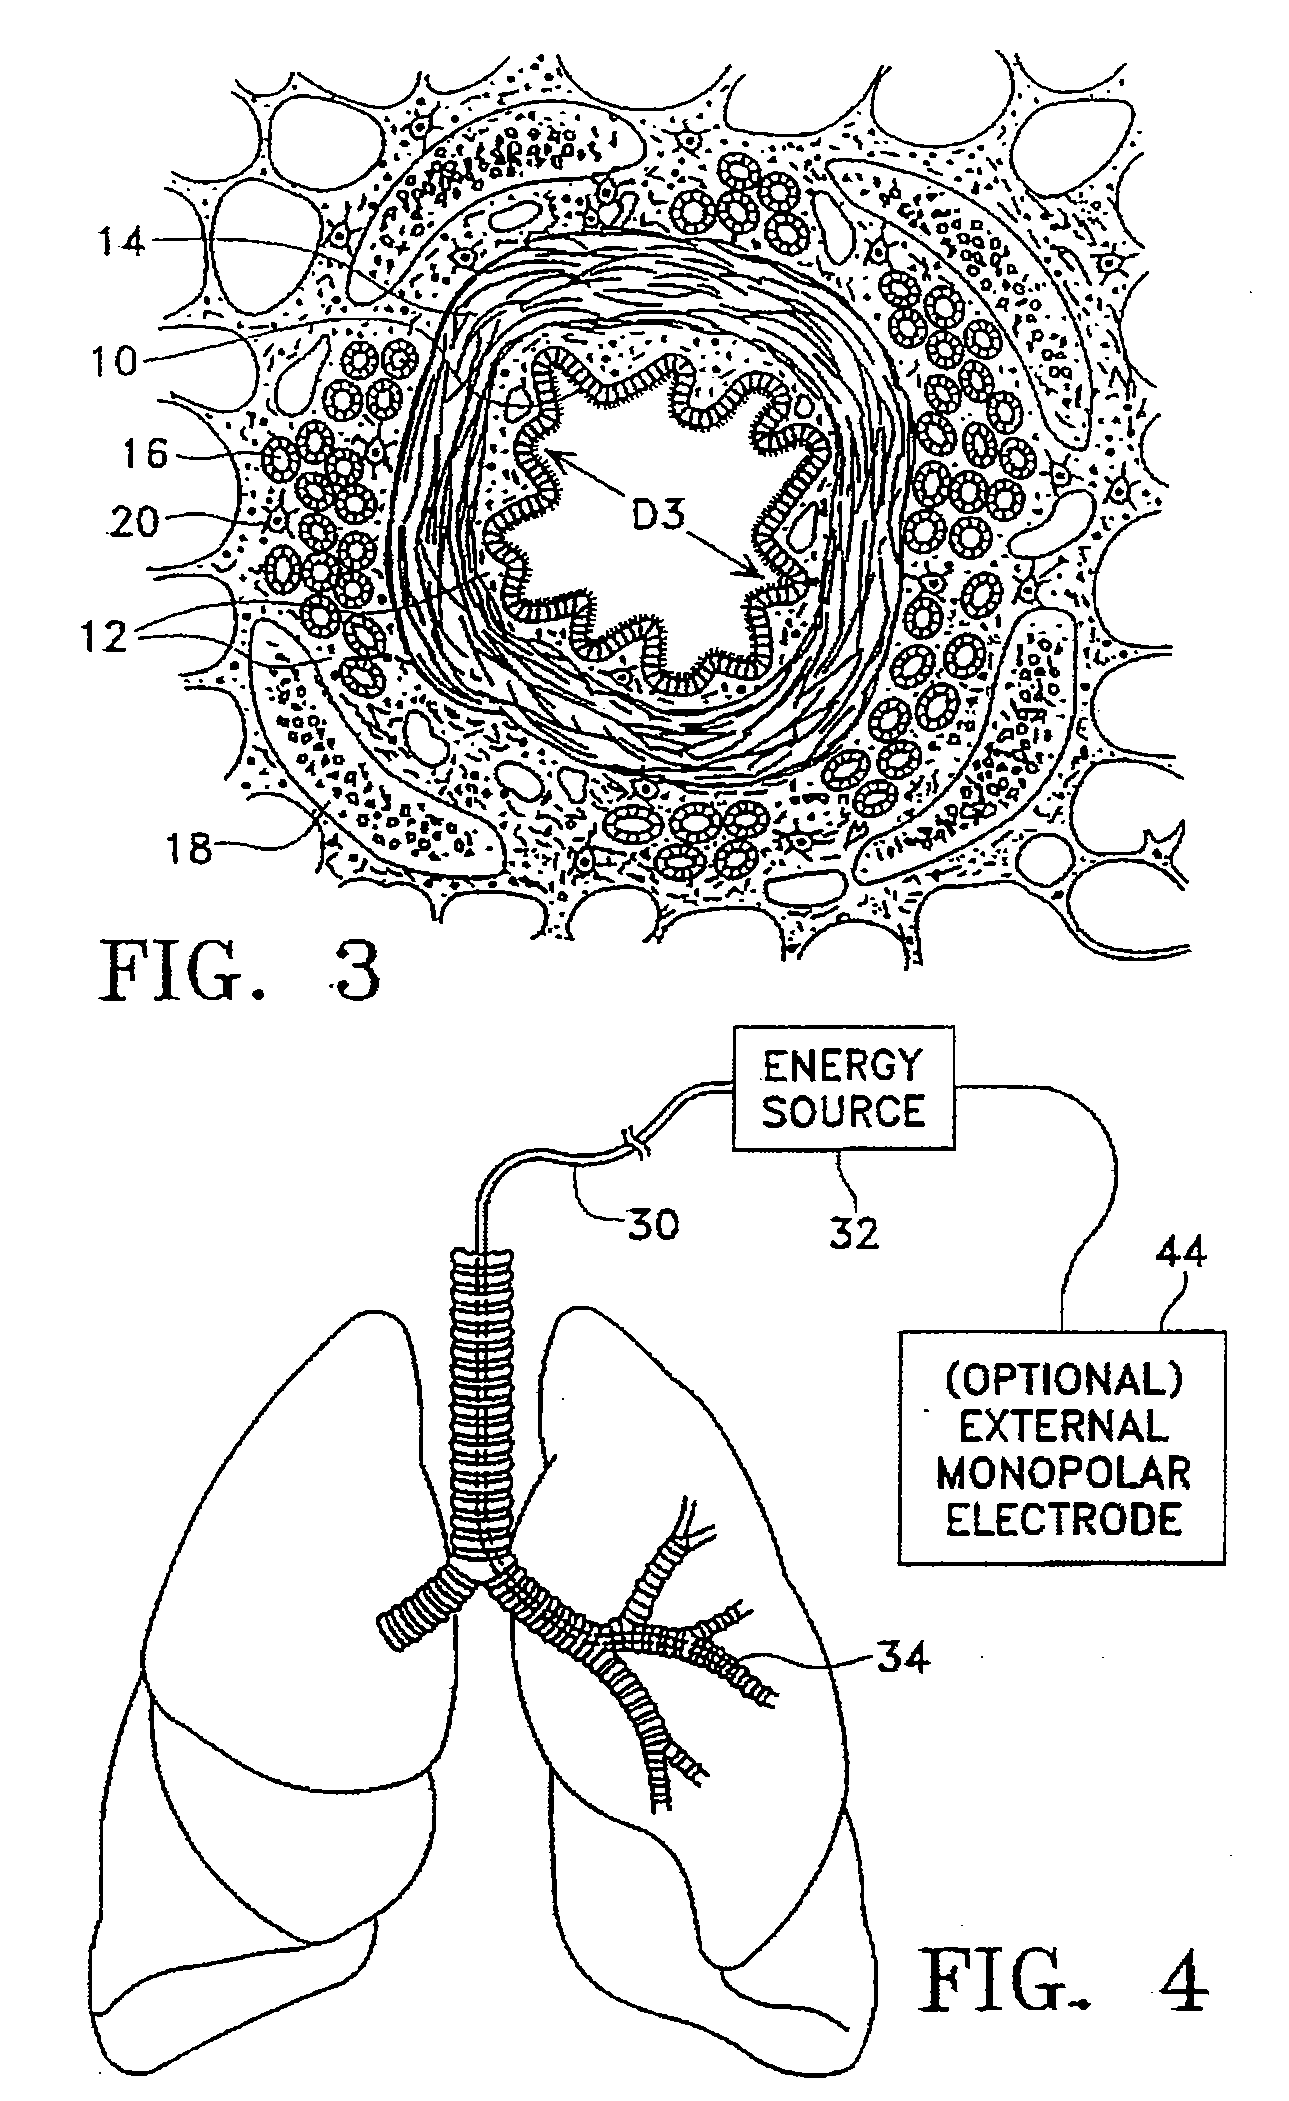 Bipolar devices for modification of airways by transfer of energy